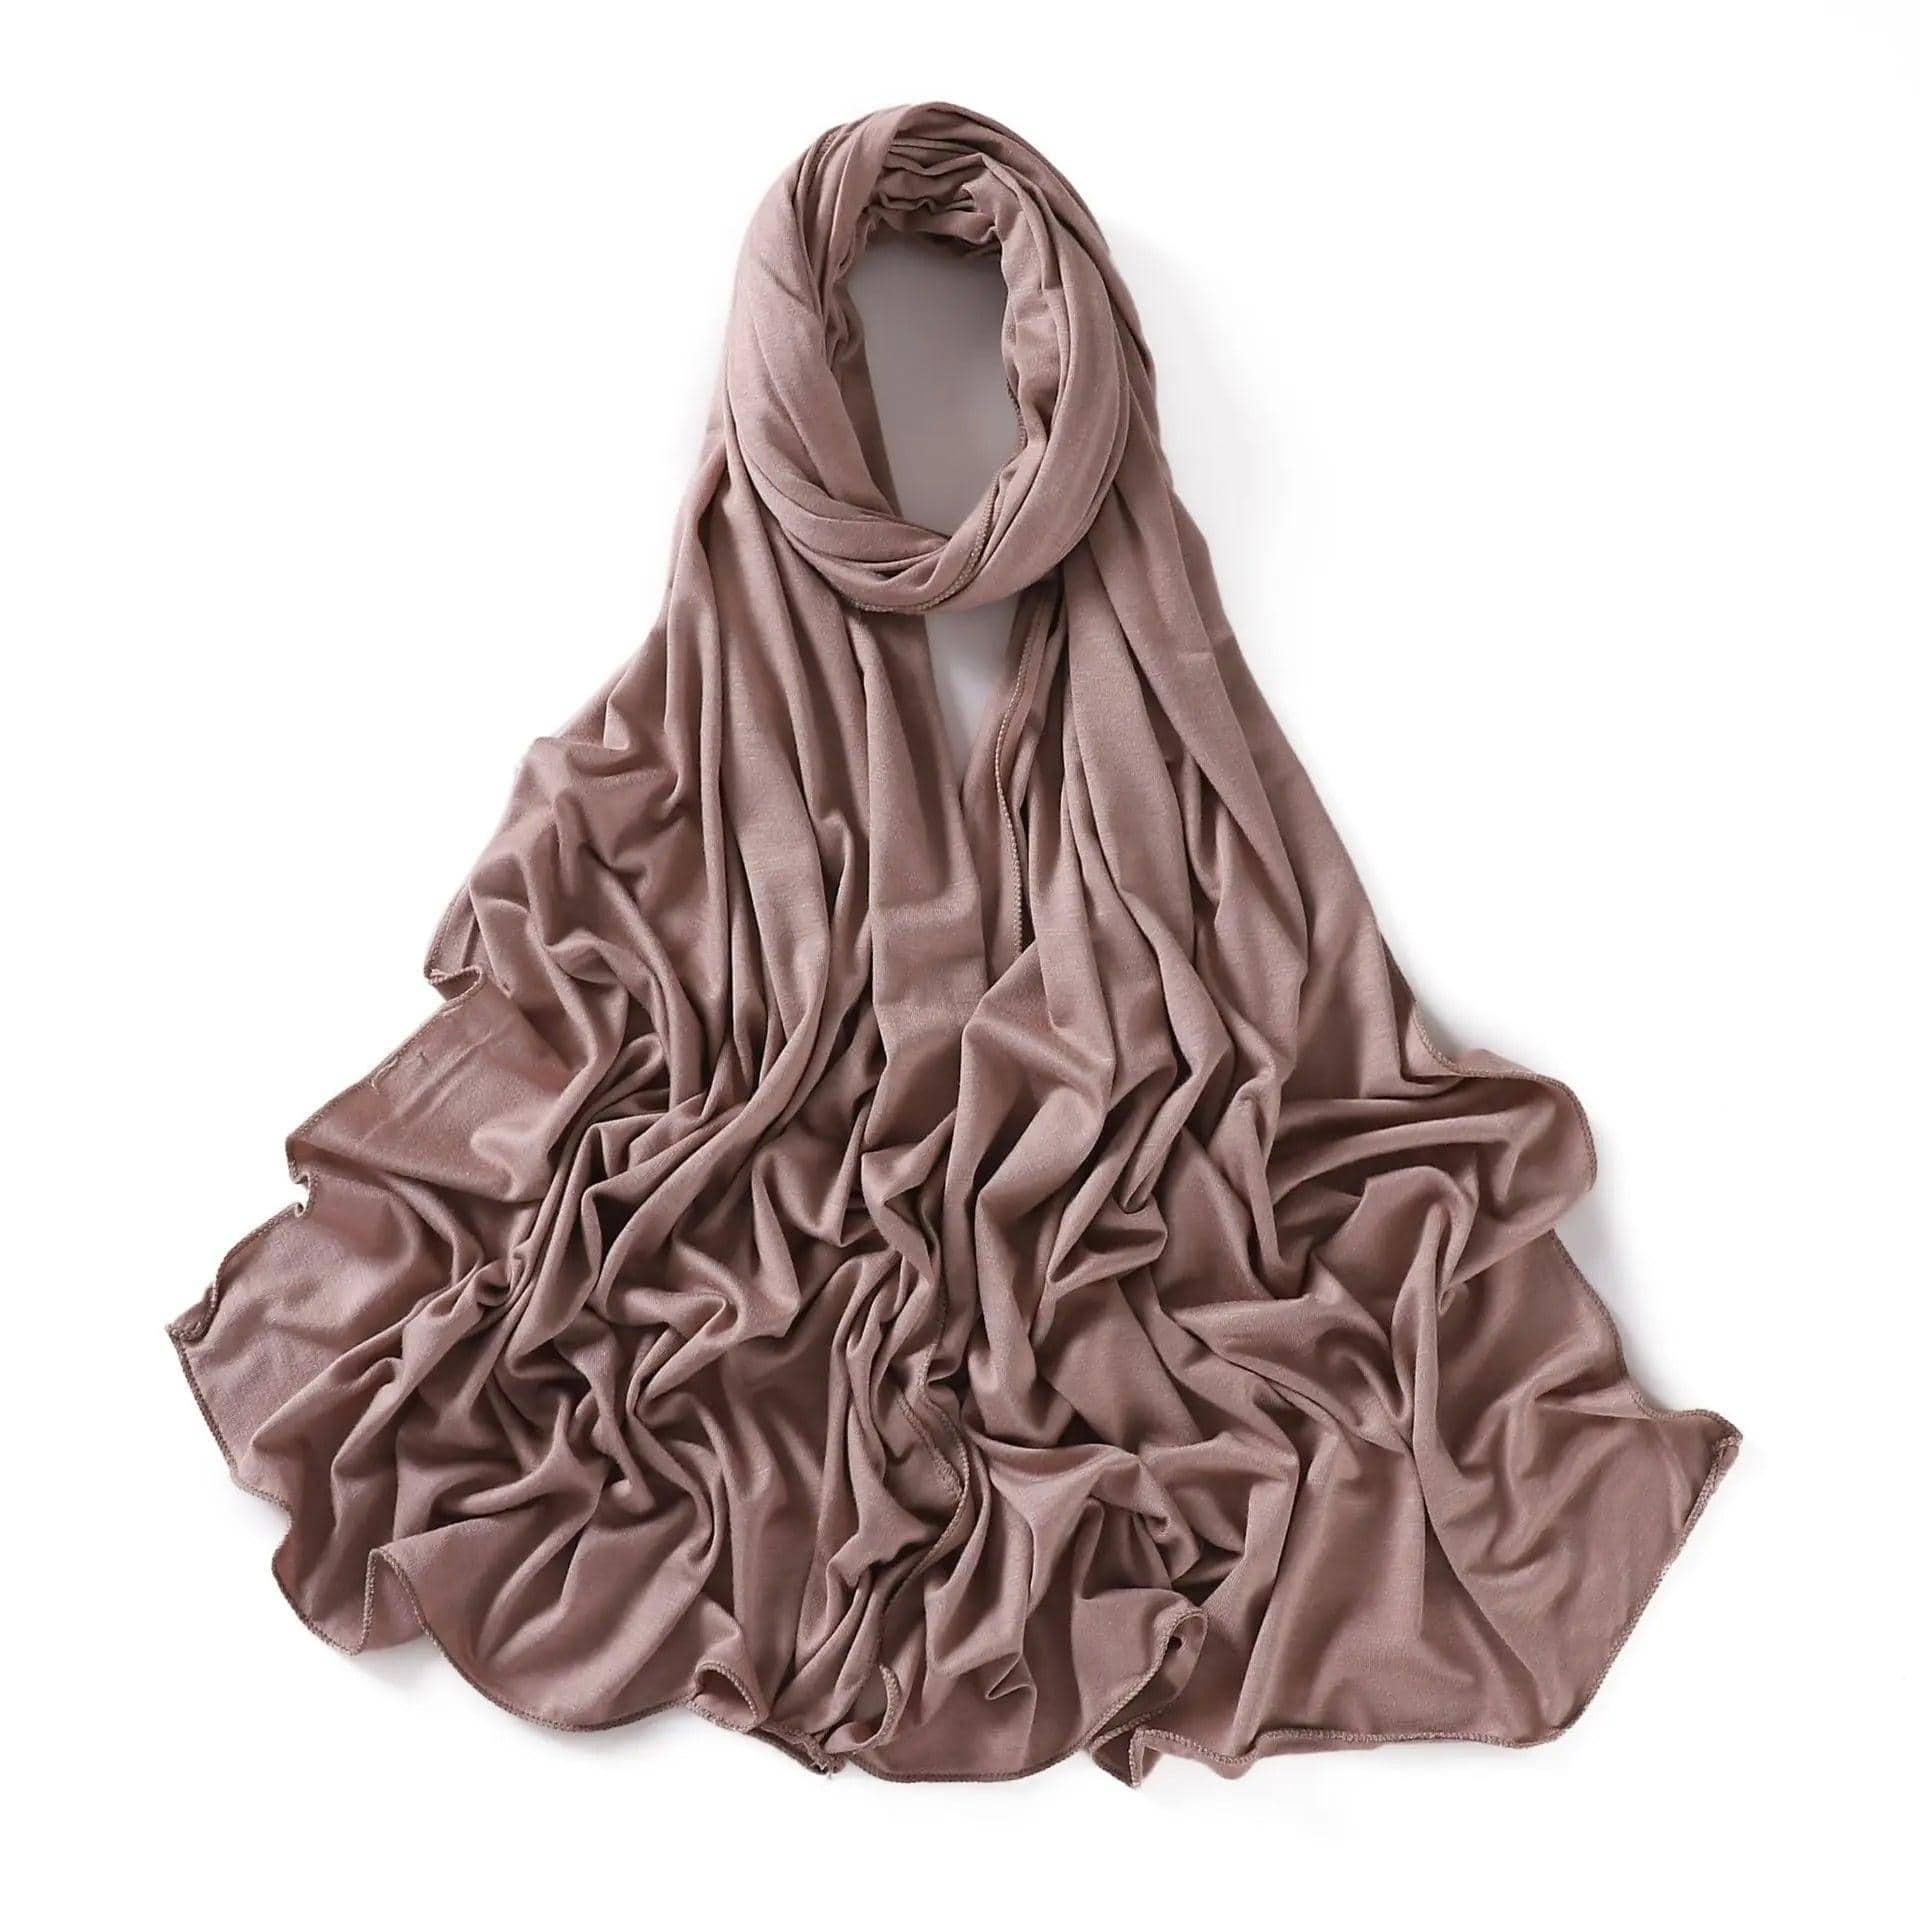 MH025 Premium soft touch jersey hijabs - Mariam's Collection